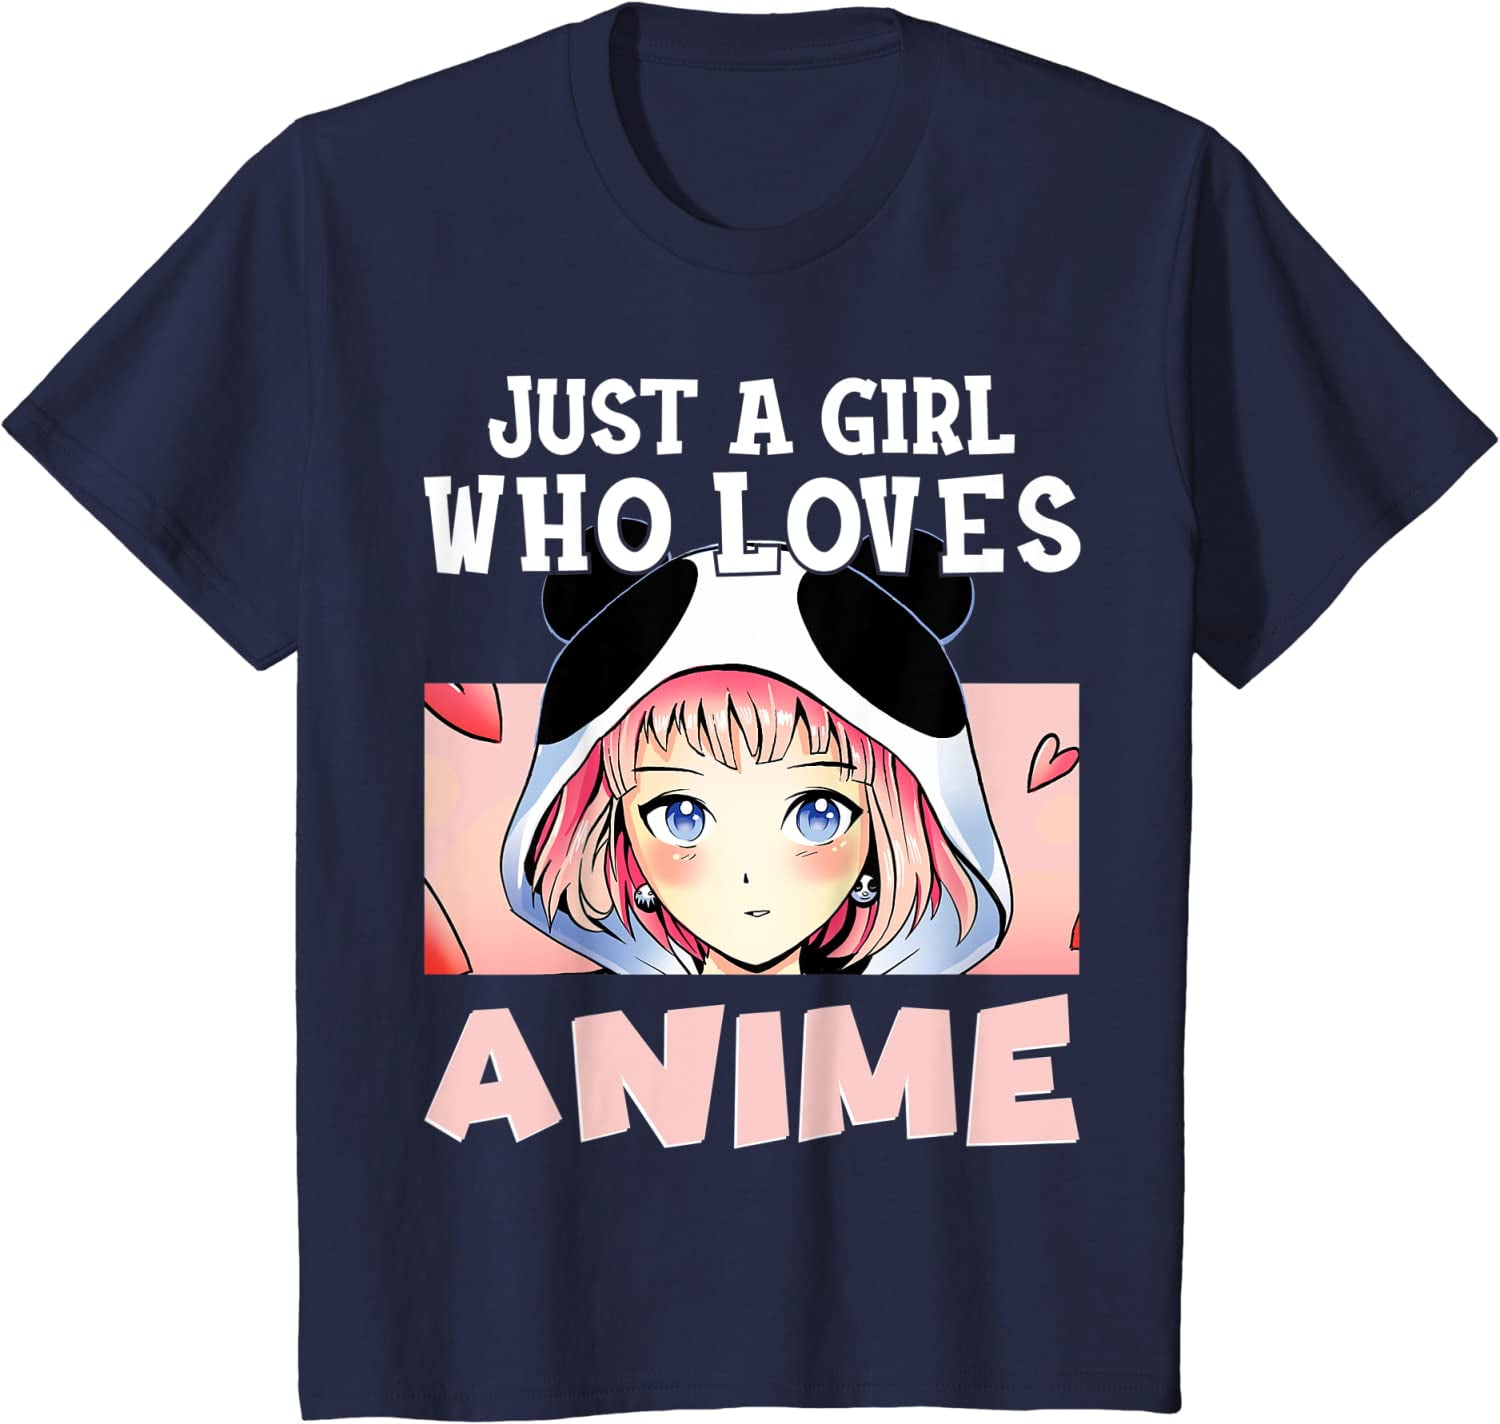 Anime Shirts for Girls Women, Just A Girl Who Loves Anime T-Shirt ...